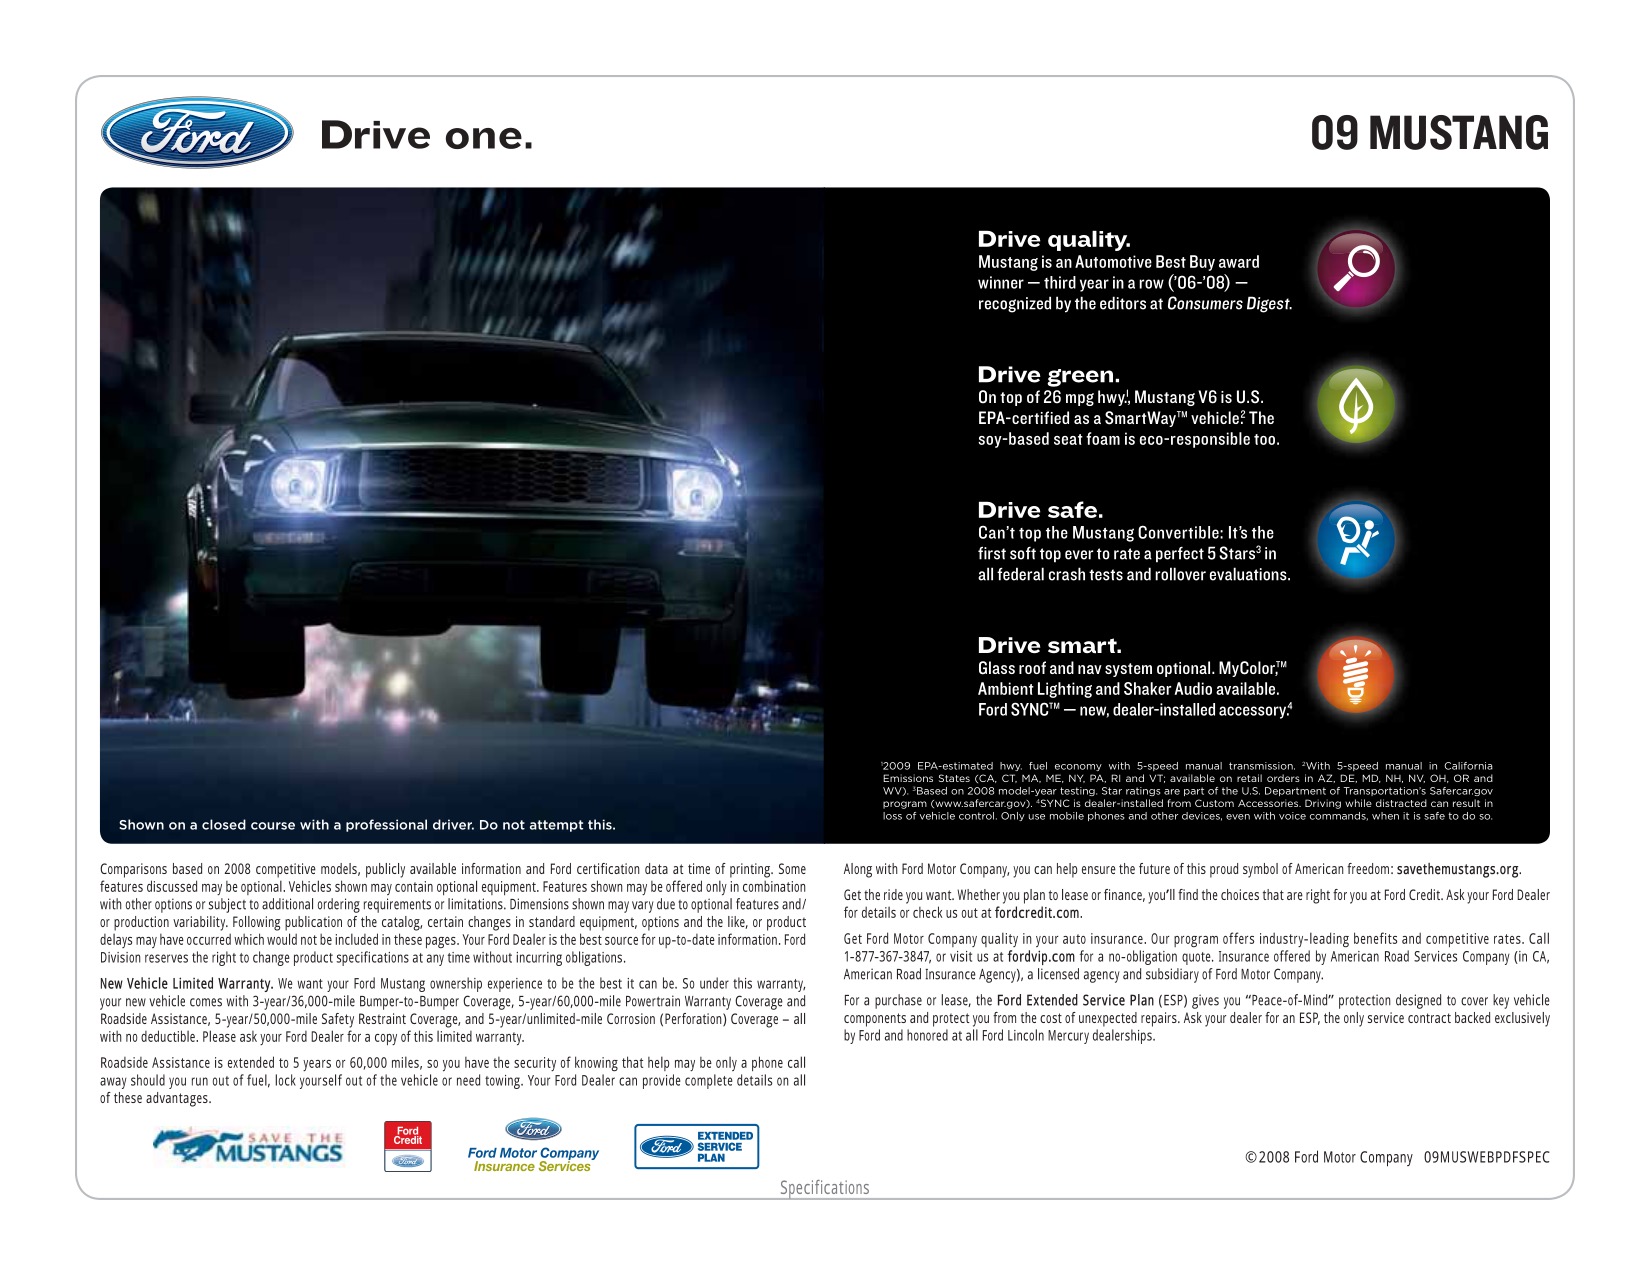 2009 Ford Mustang Brochure Page 7